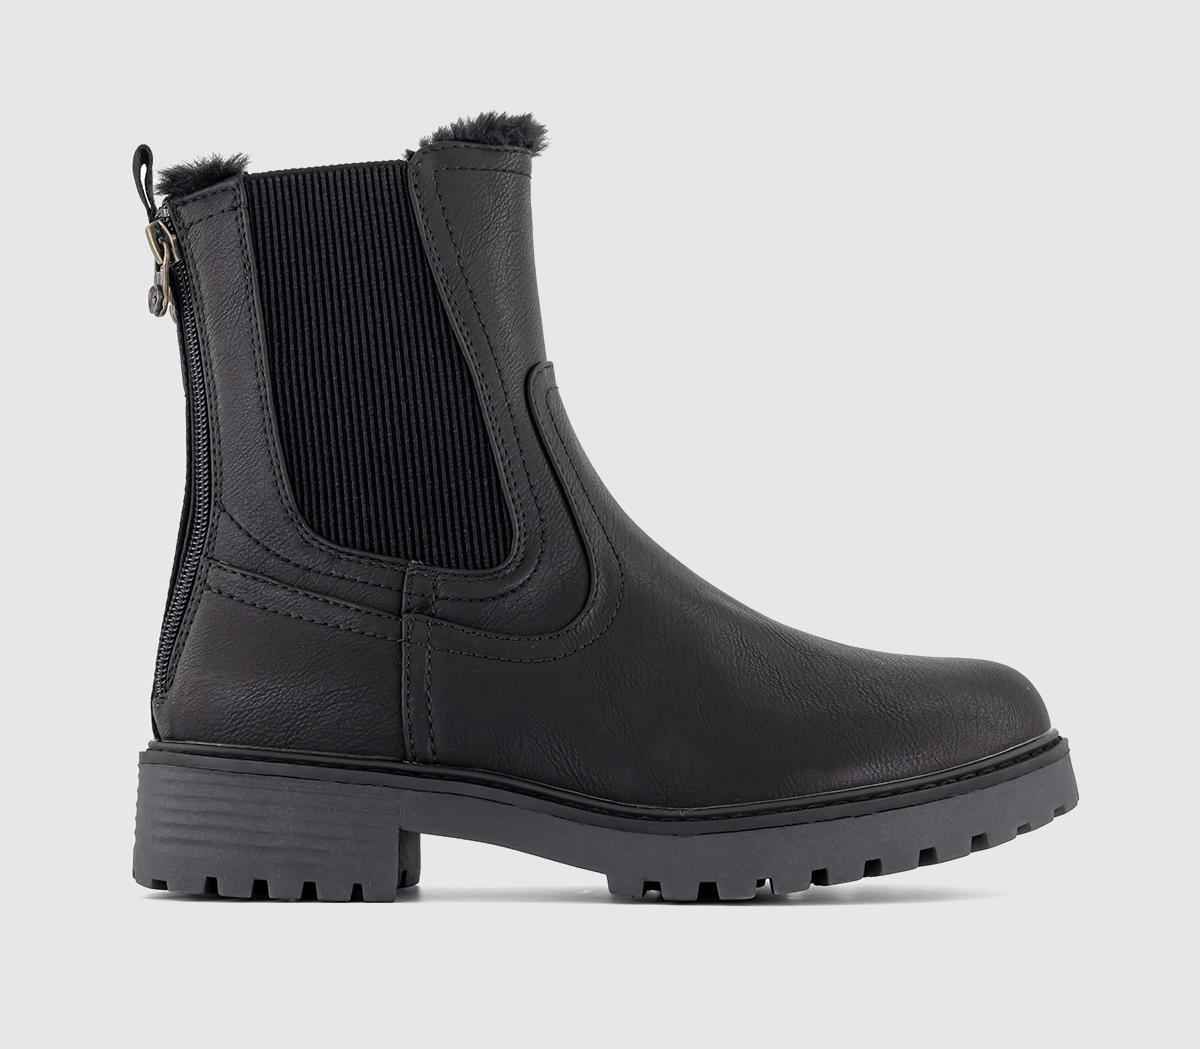 Roben Shearling Chelsea Boots Black Local Sheriff